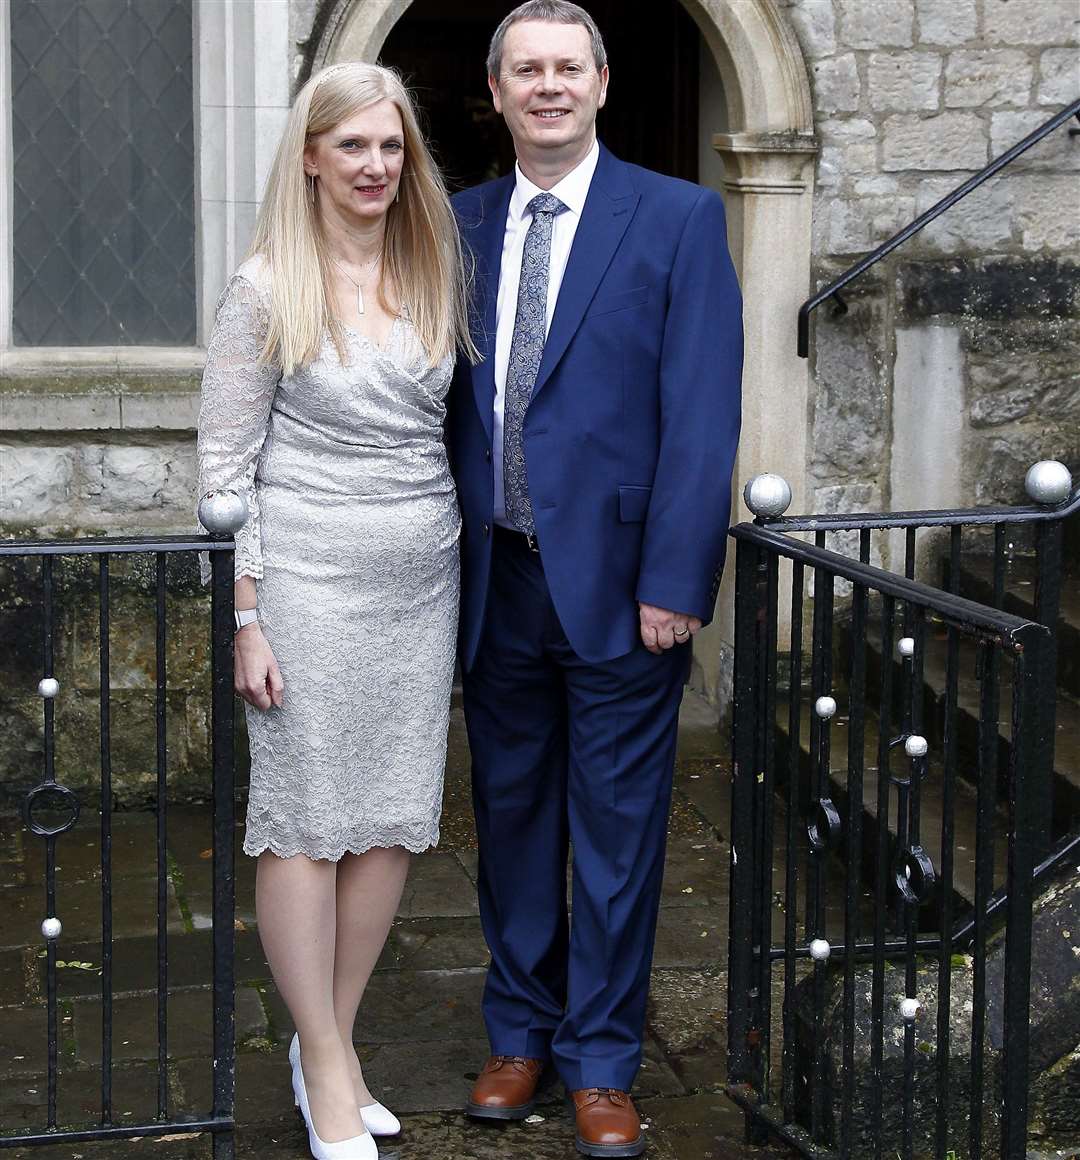 Tim Willetts and Melanie Stanford after their wedding at the Archbishop's Palace